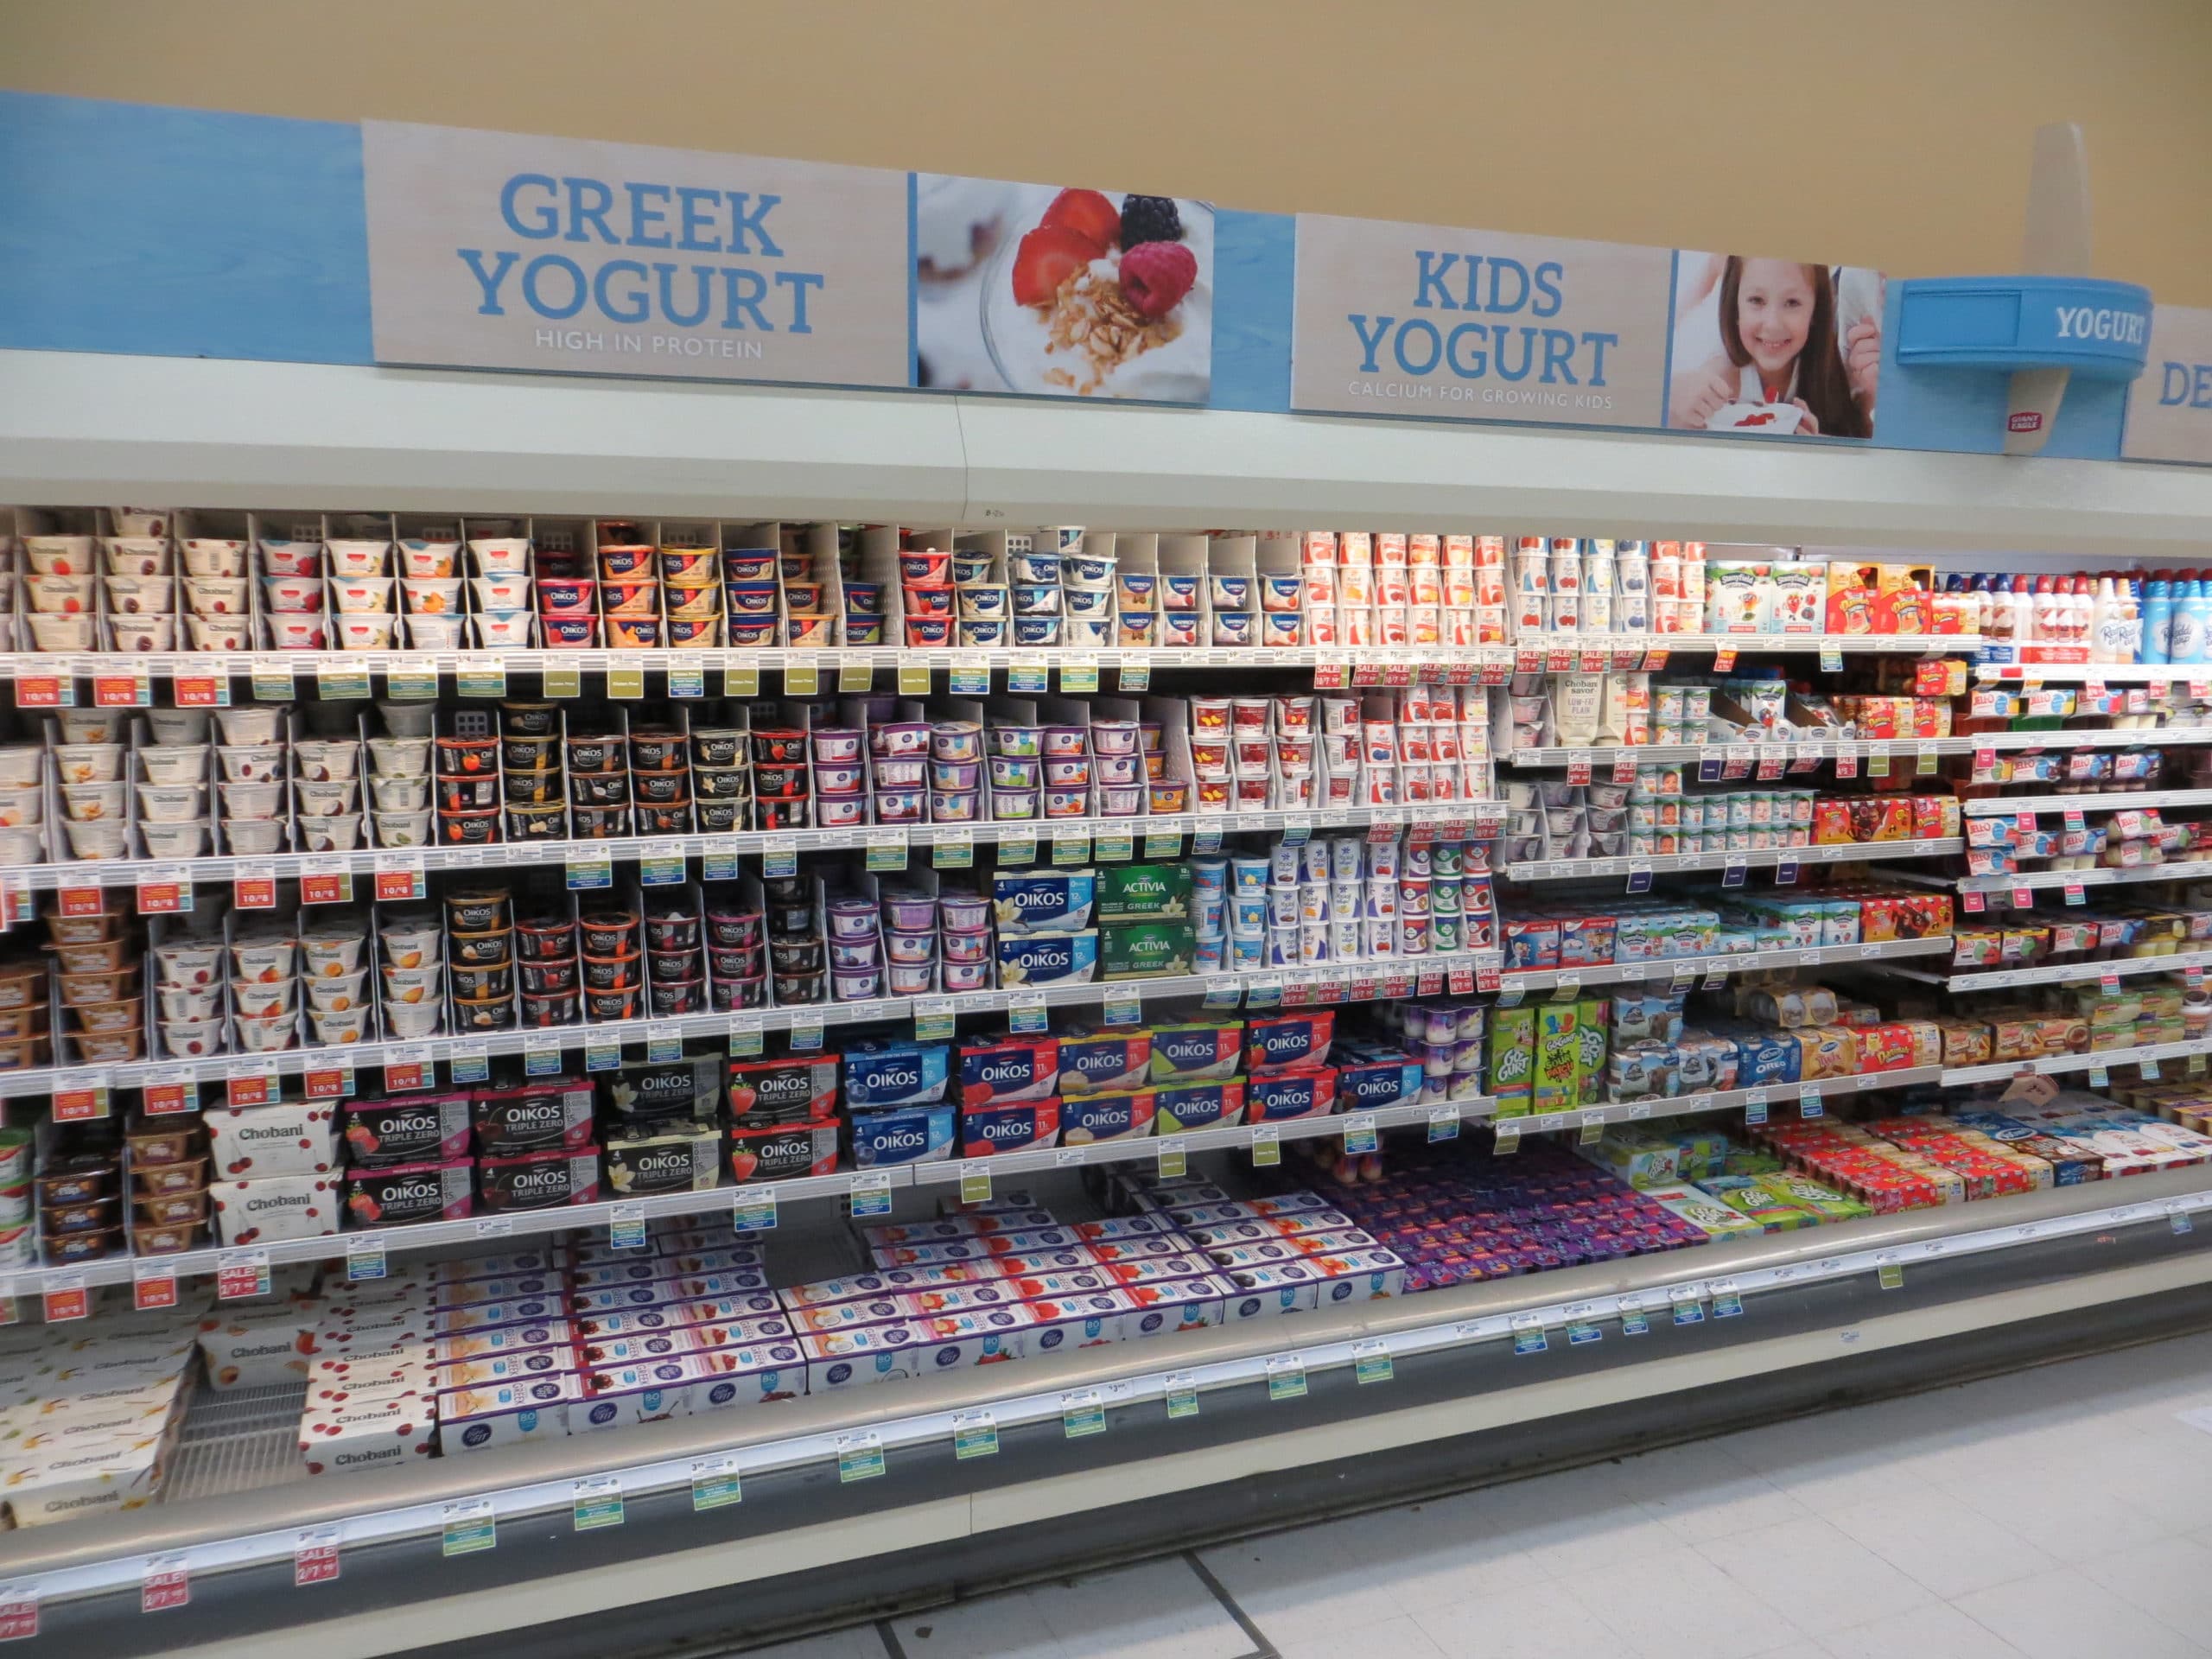 Giant Eagle Stores to Install Yogurt Dividers to Improve Shopping Experience, Increase Sales